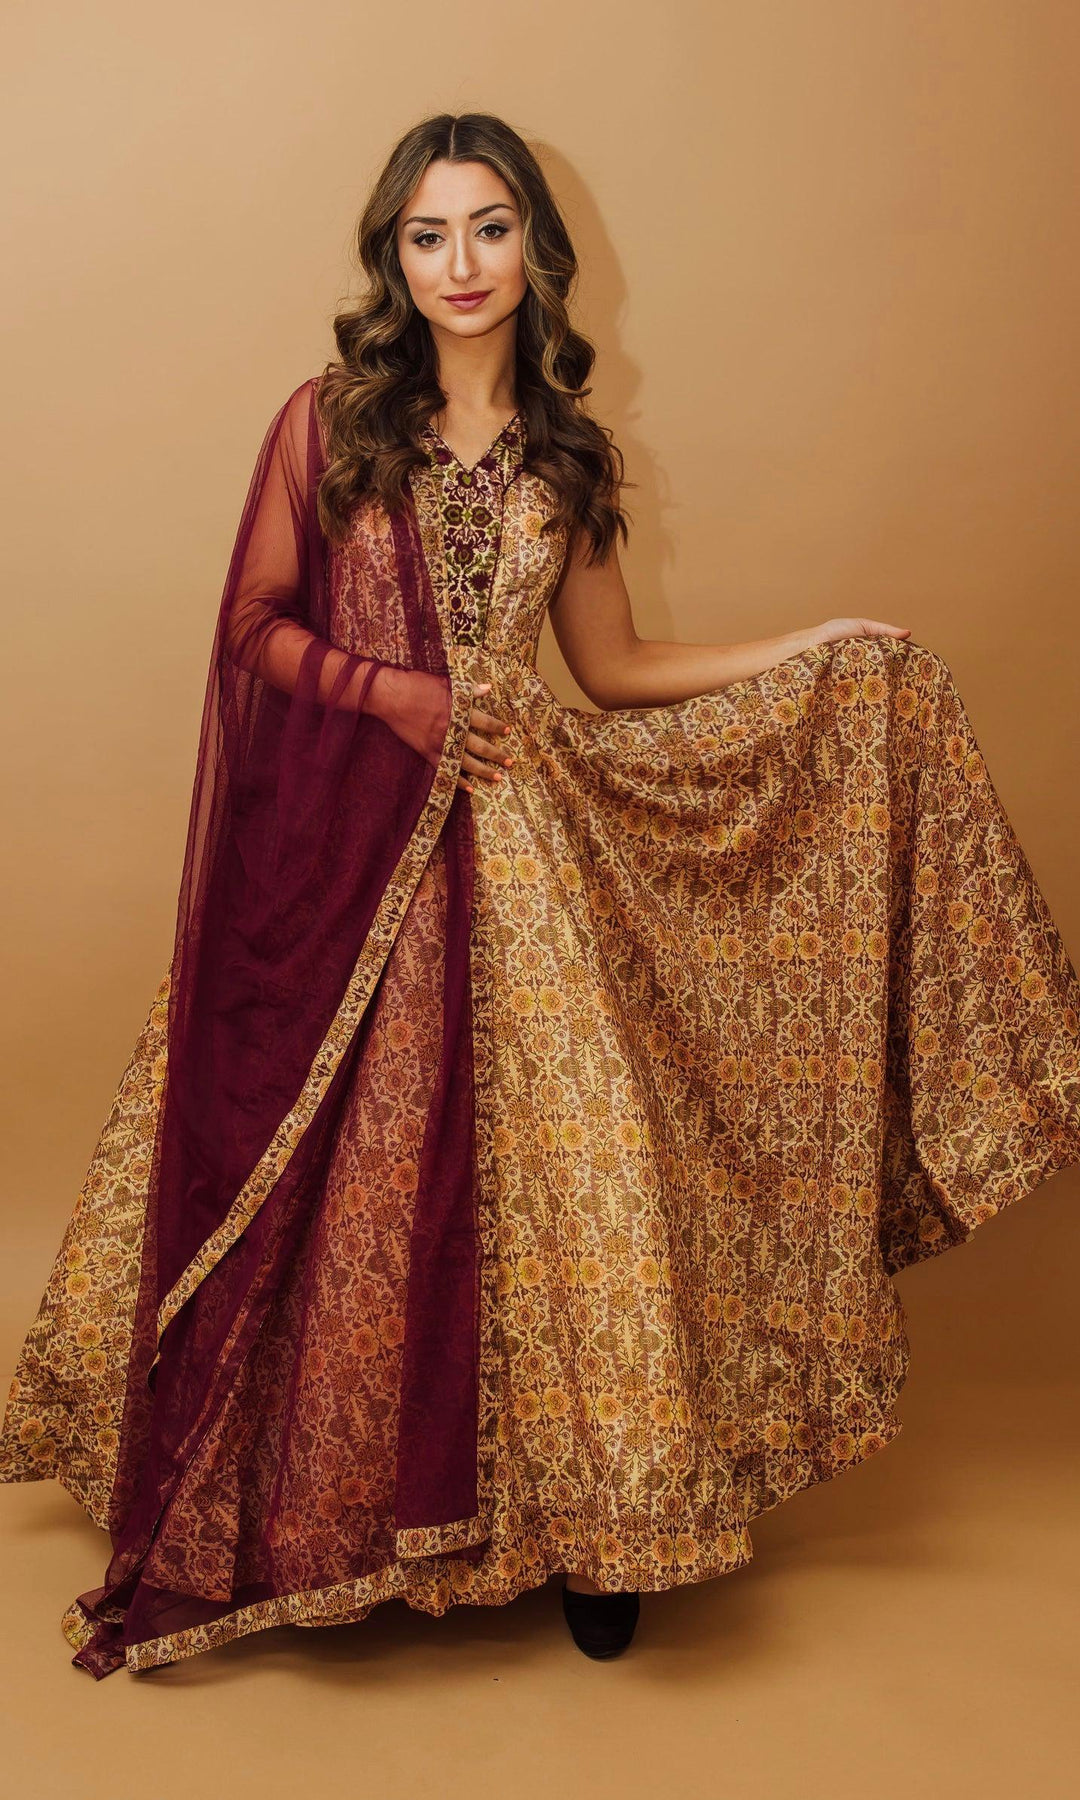 burgendy outfit  Indian fashion dresses, Stylish dresses, Indian outfits